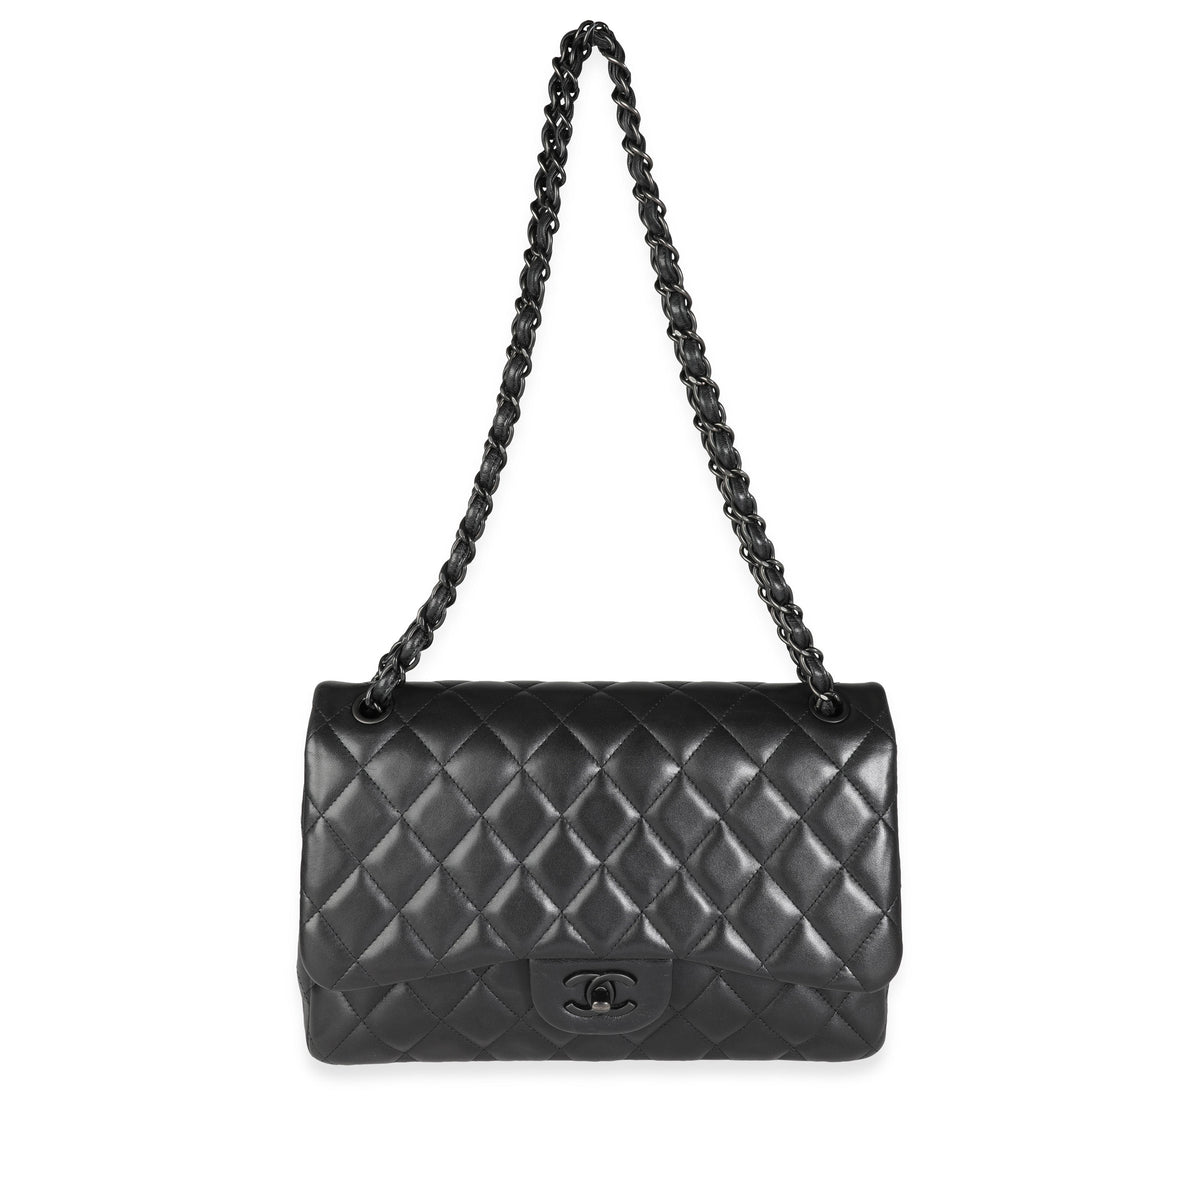 AUTHENTIC CHANEL SO Black Lambskin Leather Quilted Classic Double Flap Jumbo  Bag $12,500.00 - PicClick